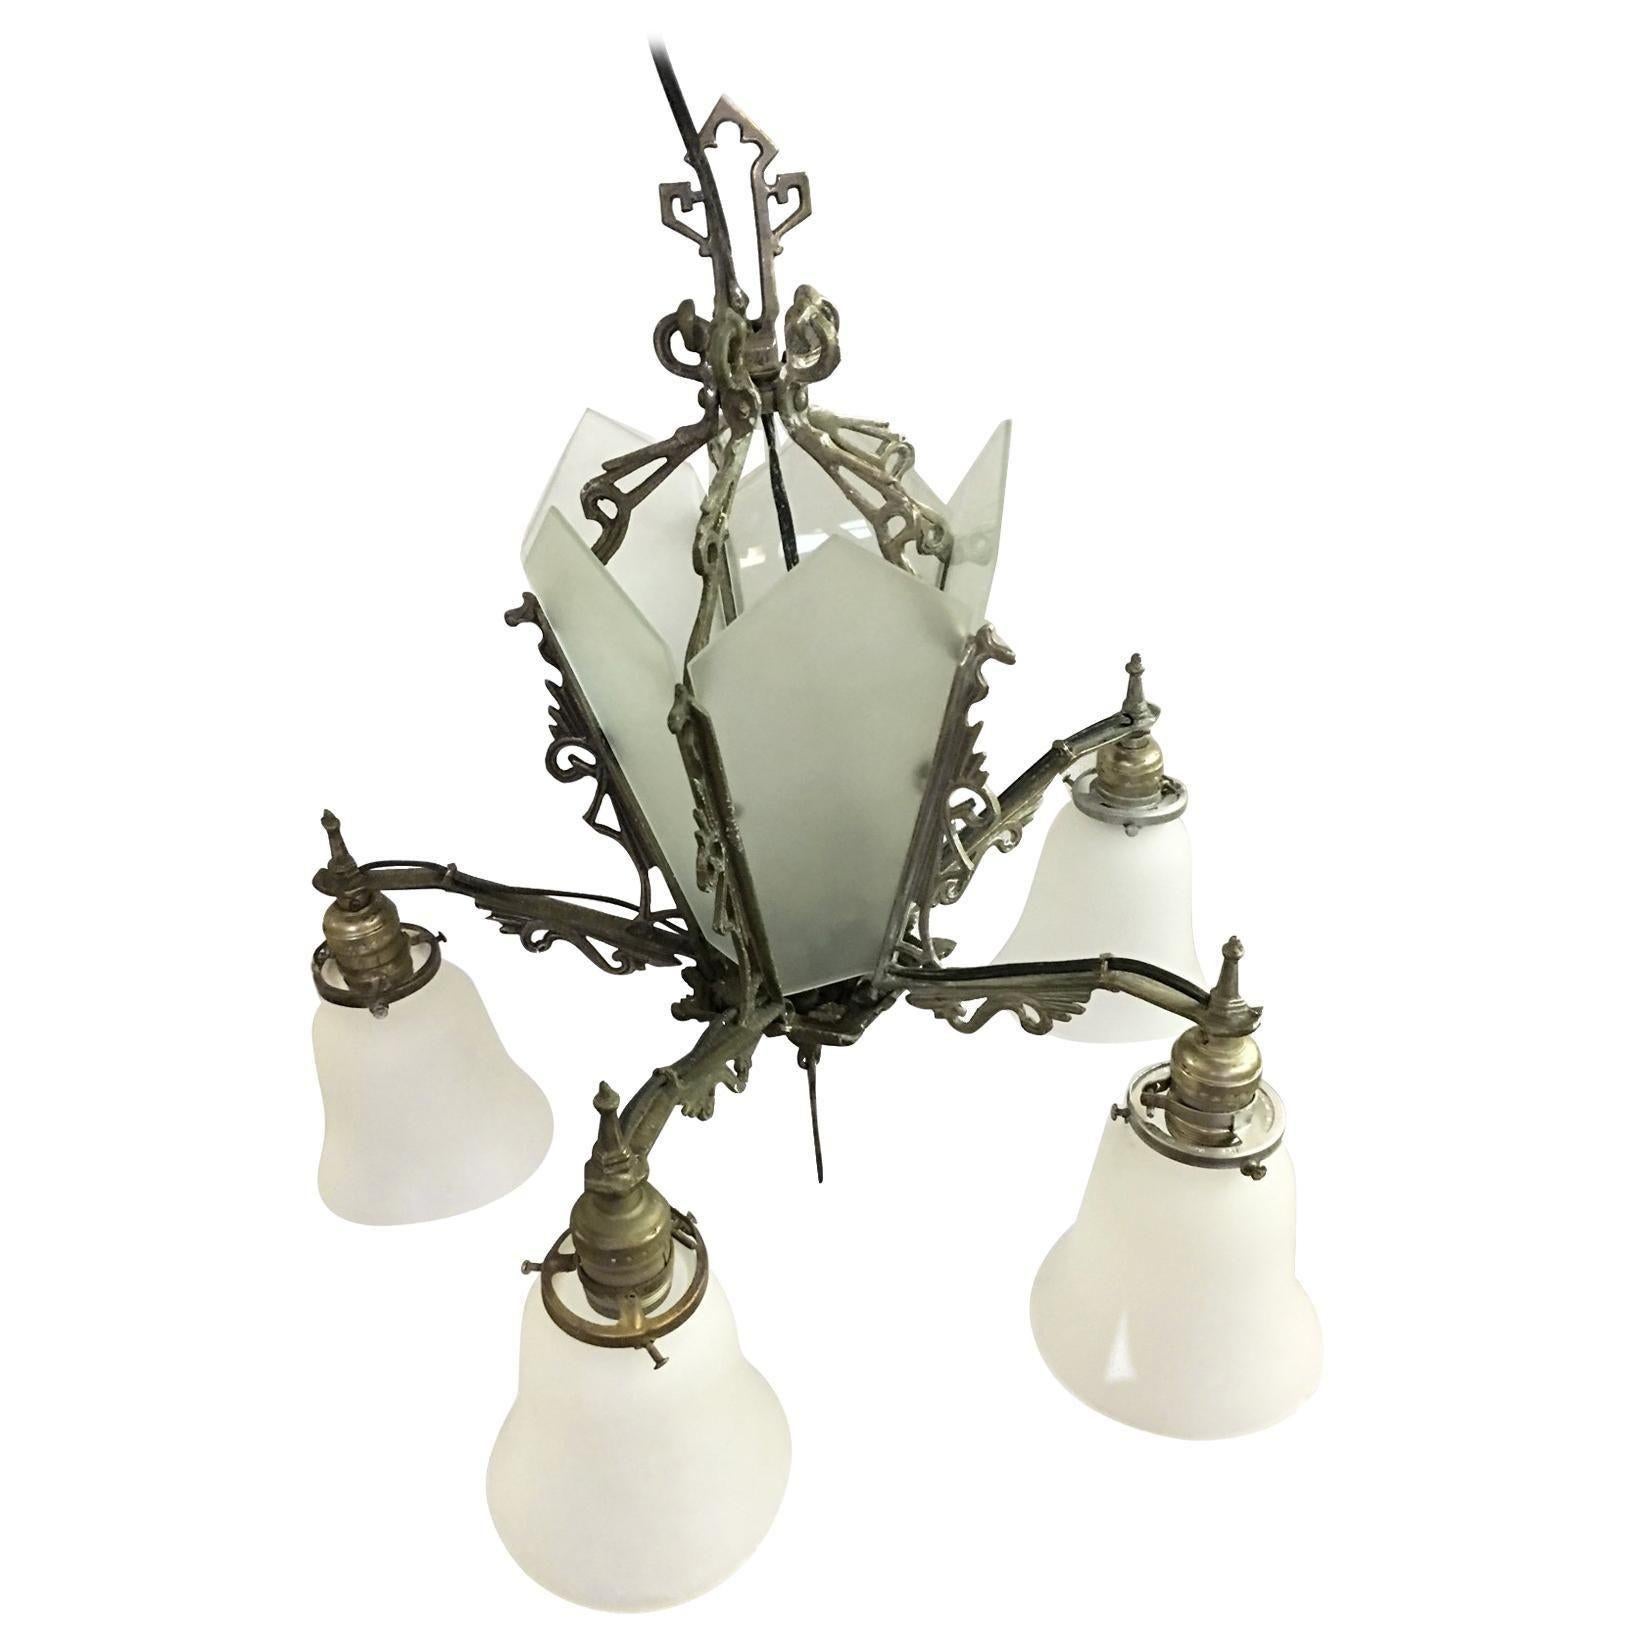 Five-arm geometric Art Deco chandelier with five hanging lights with bell-shaped shades and light-up slat opal glass center. The piece features scrolling details throughout while the base of the chandelier features a geometric pattern.

Dimensions: